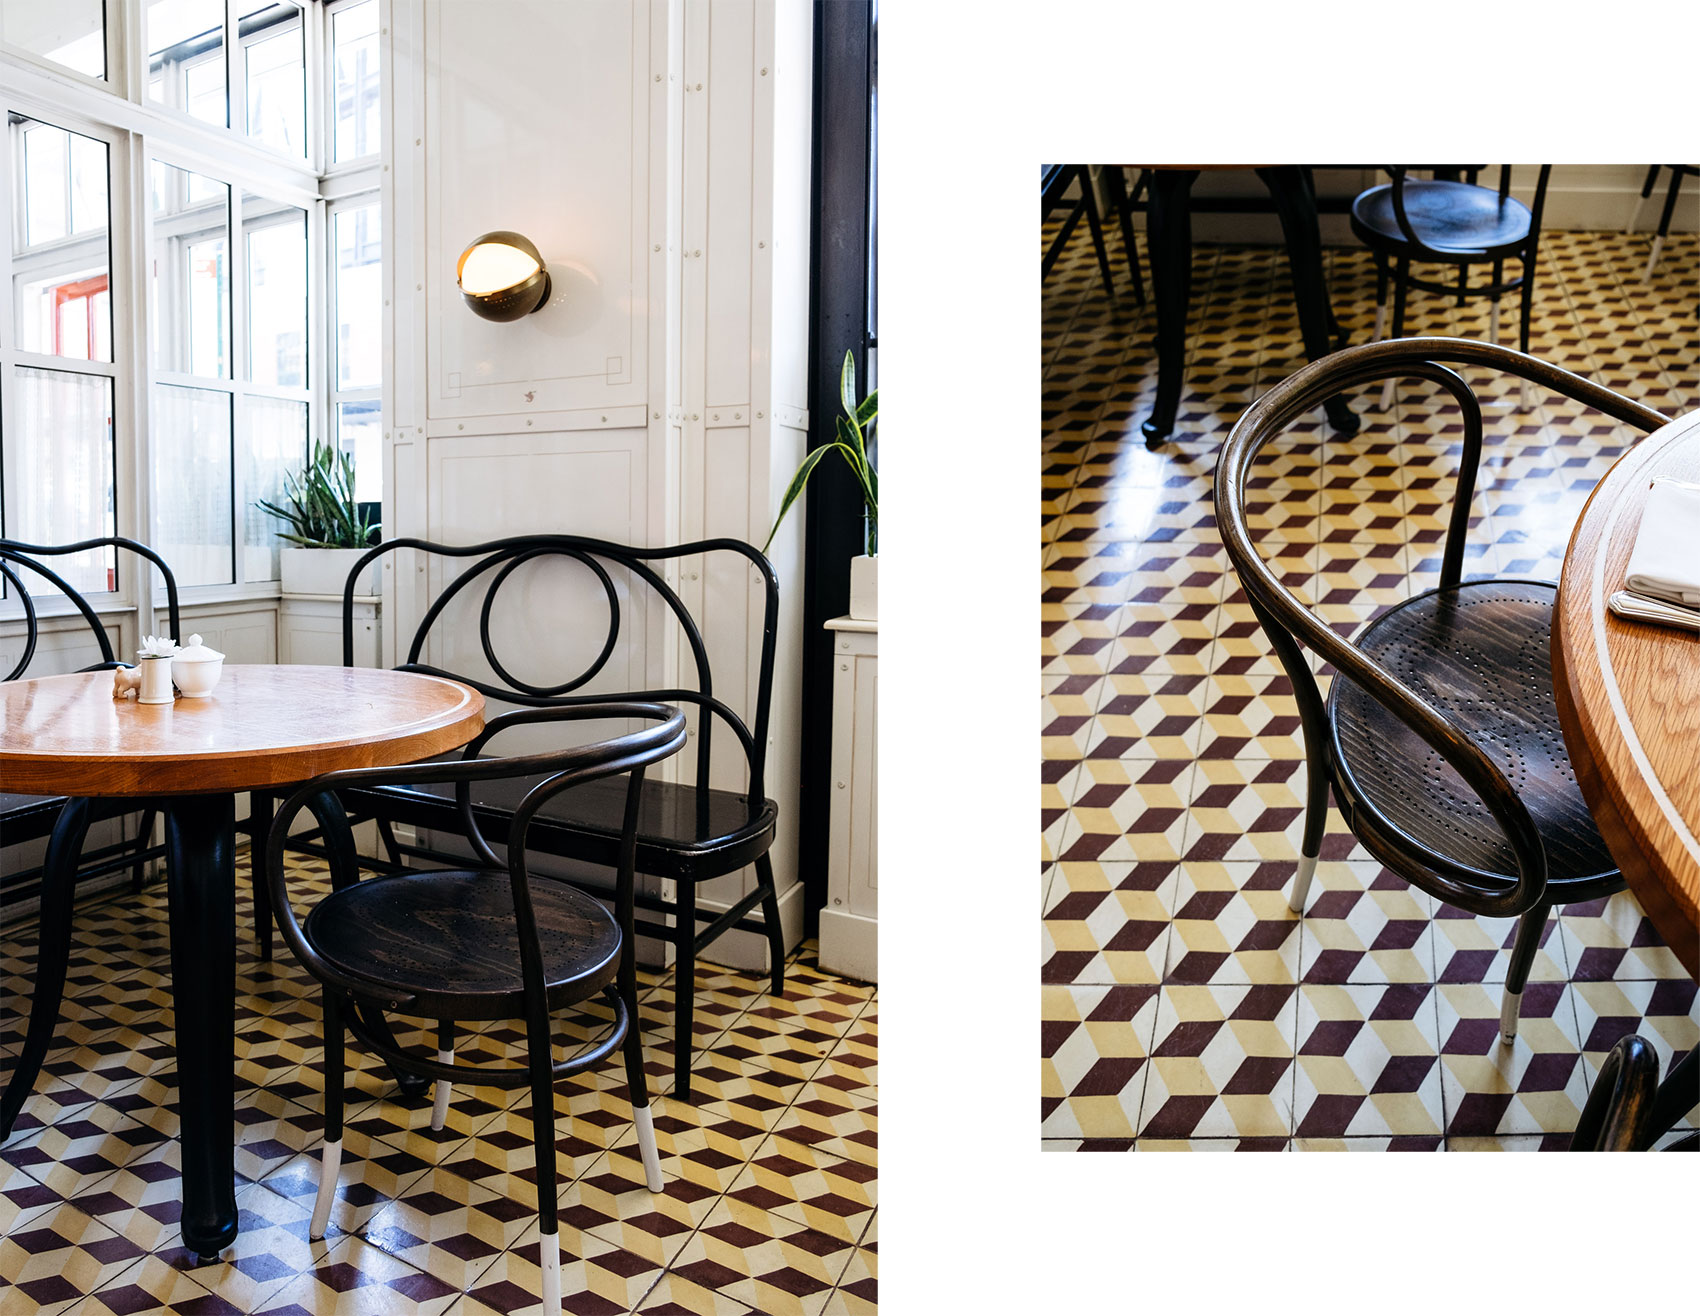 Patterned floors and bentwood chairs at The Standard Grill restaurant in the Meatpacking District New York